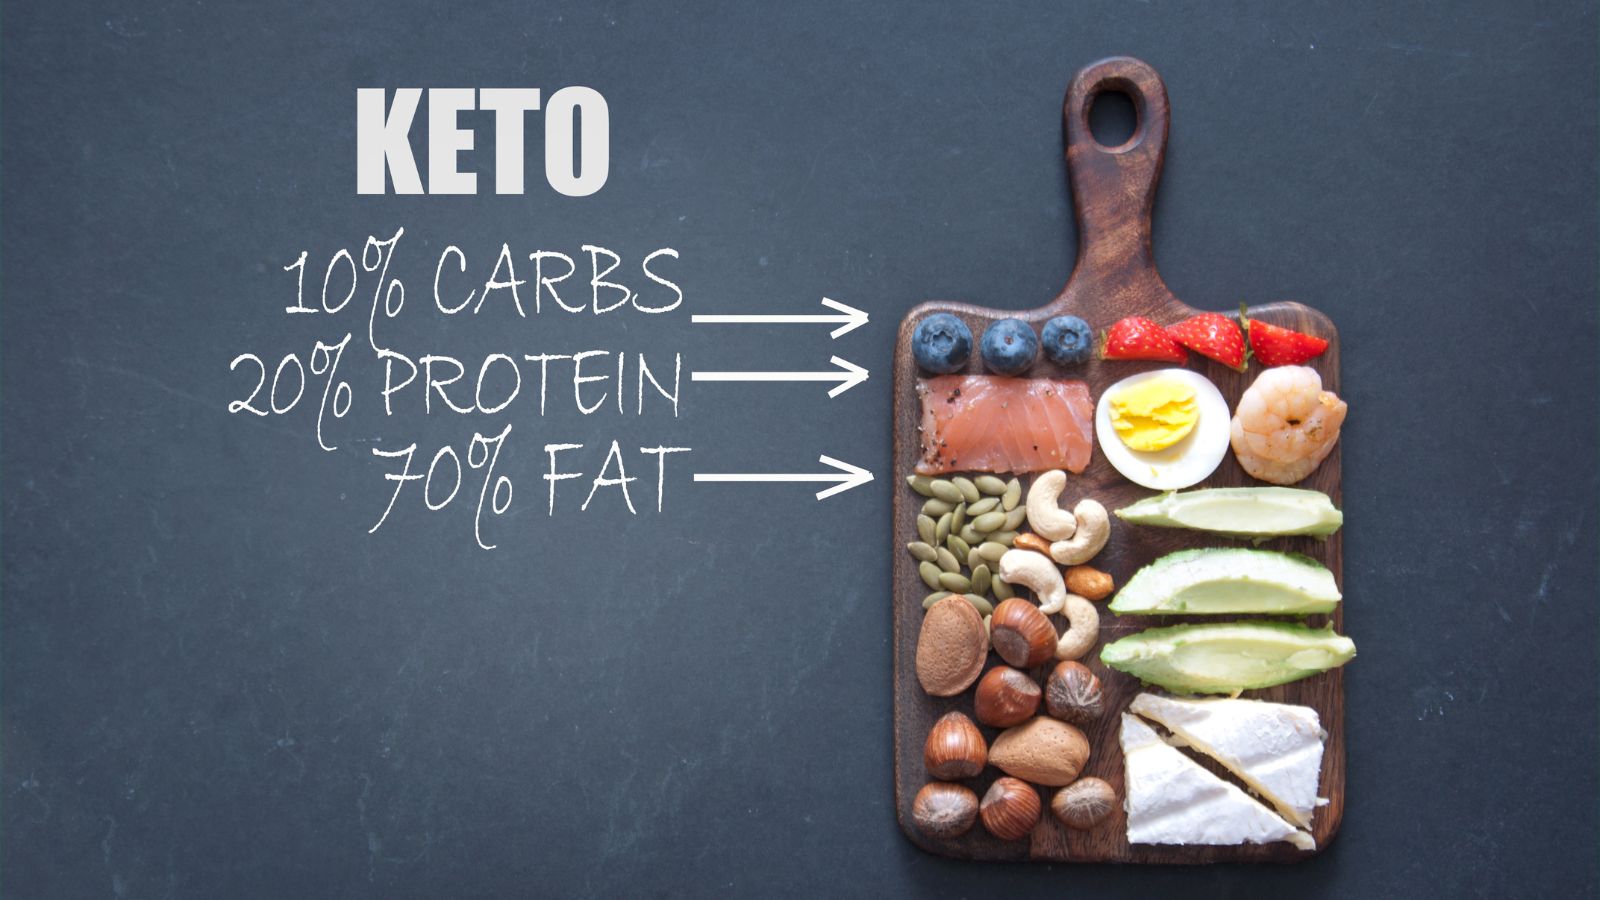 Keto and IF Many Ways to Improve Your Health!